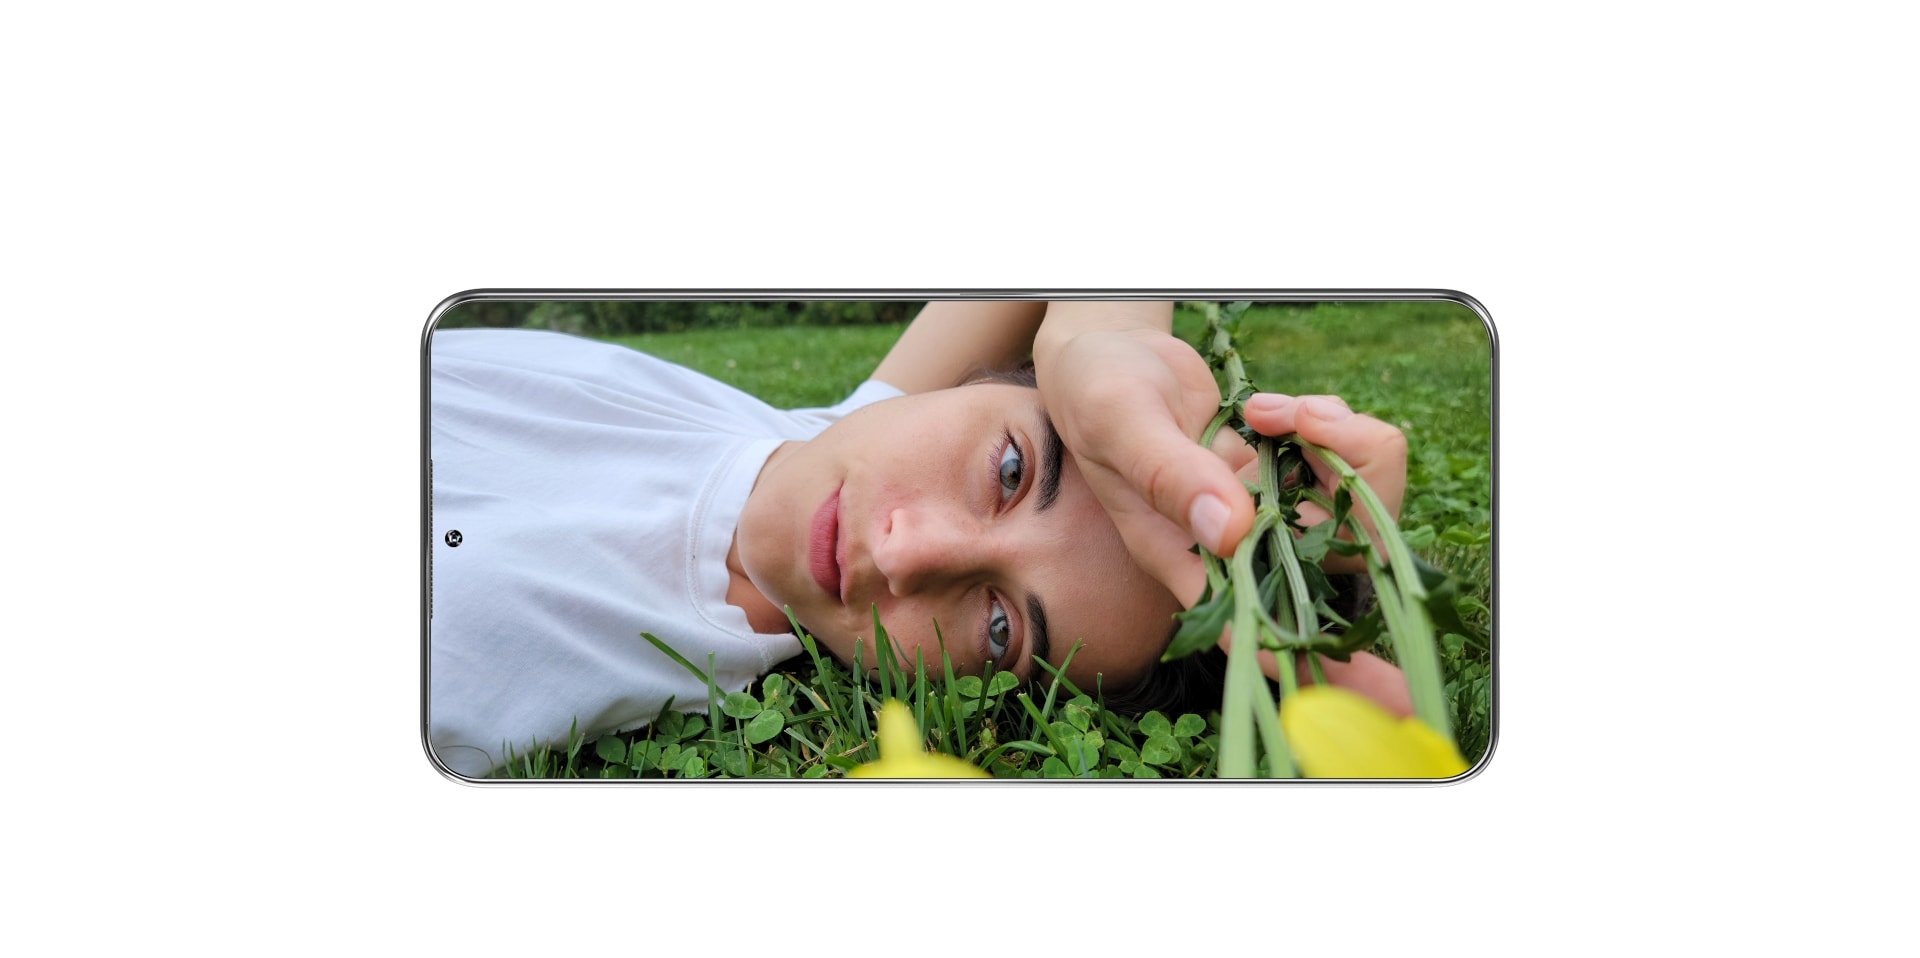 An image of a person lying on the grass and holding a flower on the screen of a smartphone.